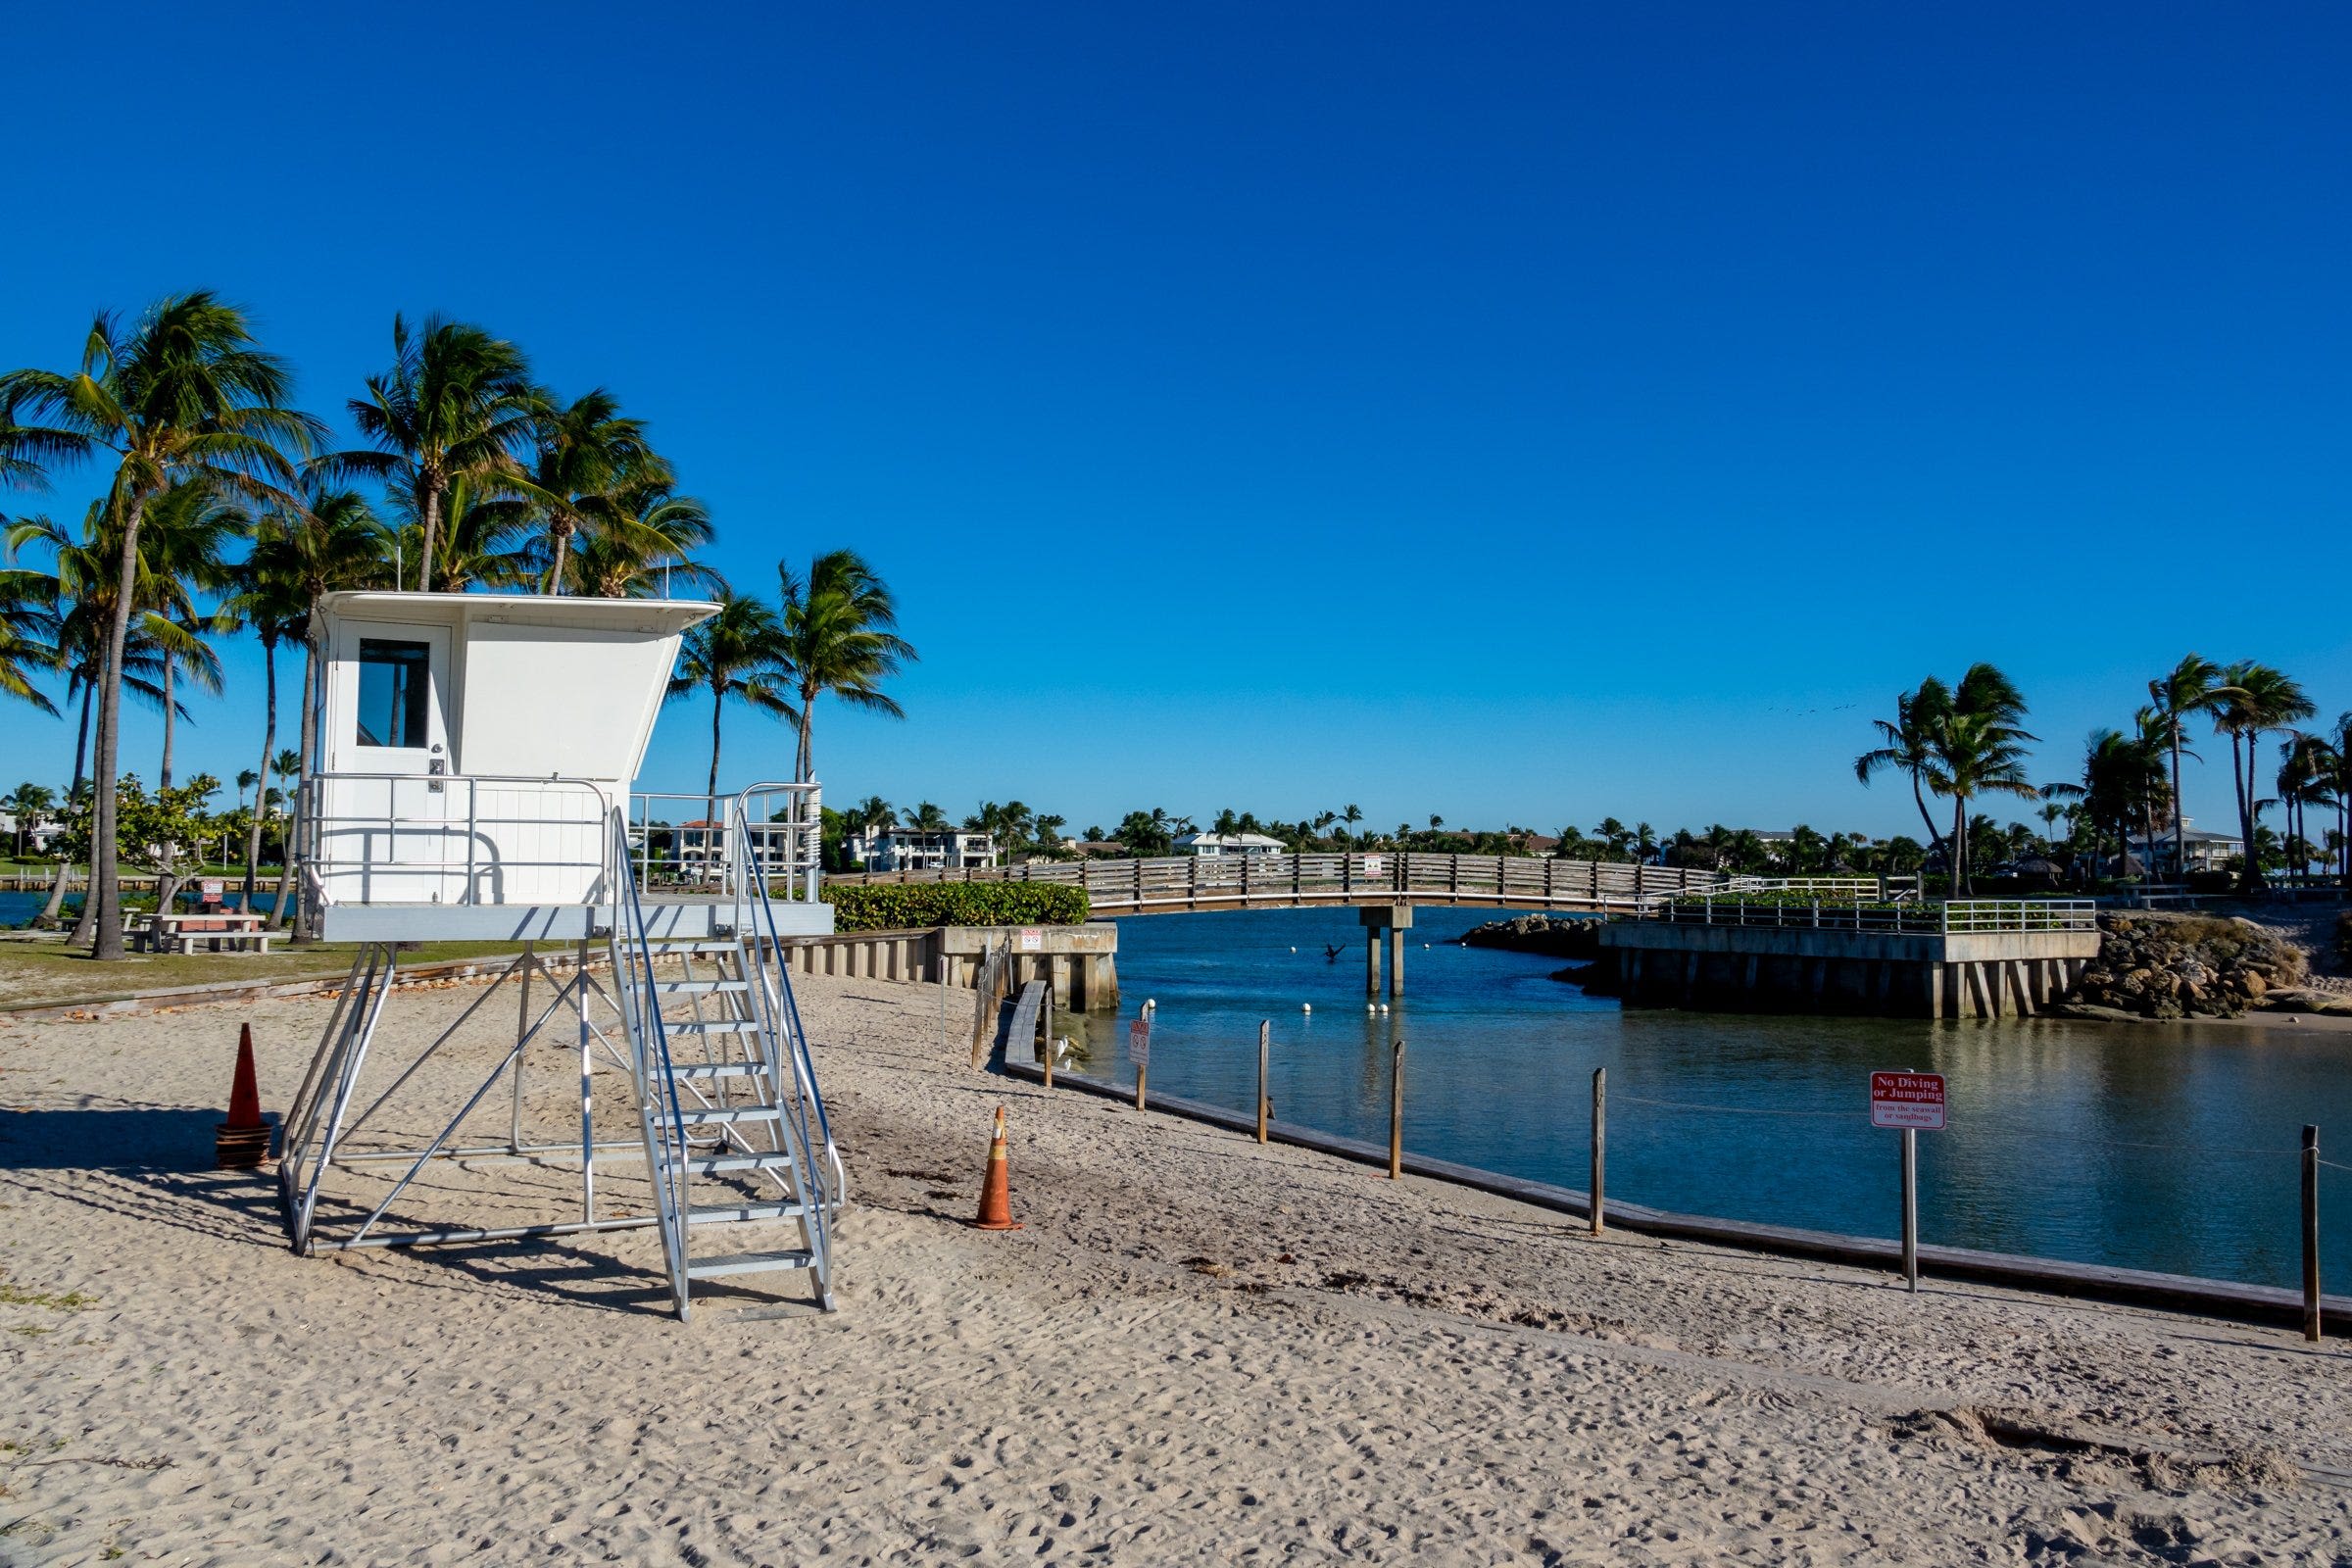 No-swim advisory in place for Dubois Park in Jupiter after water shows high bacteria count